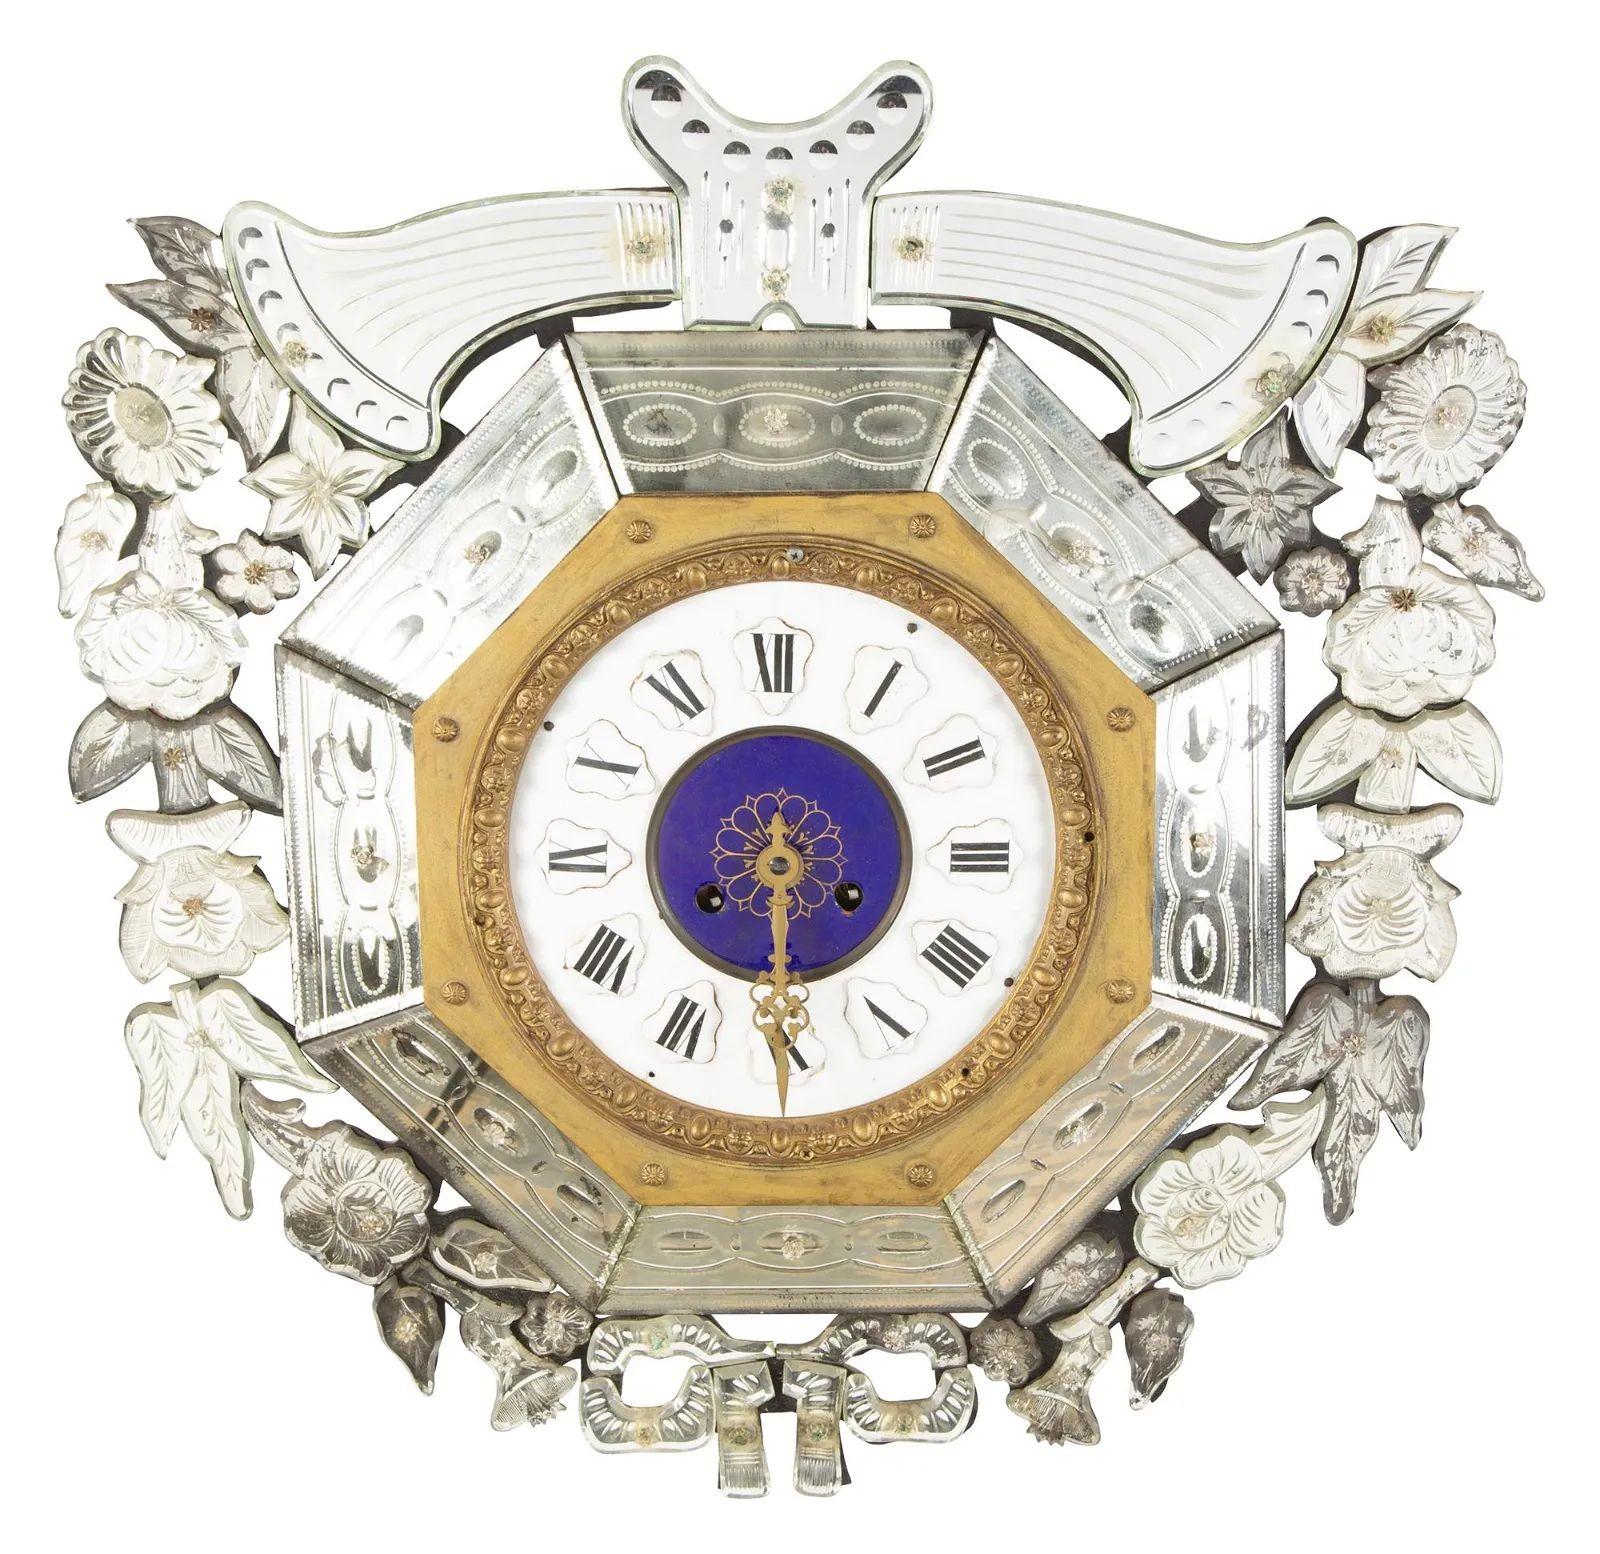 Viennese Enamel and Mirrored Hanging Wall Clock having a Porcelain Face
 
A stunning large and impressive decorative wall clock with a celeste blu and white porcelain and enamel face, refined Roman numerals and an octagonal gold frame.  The central